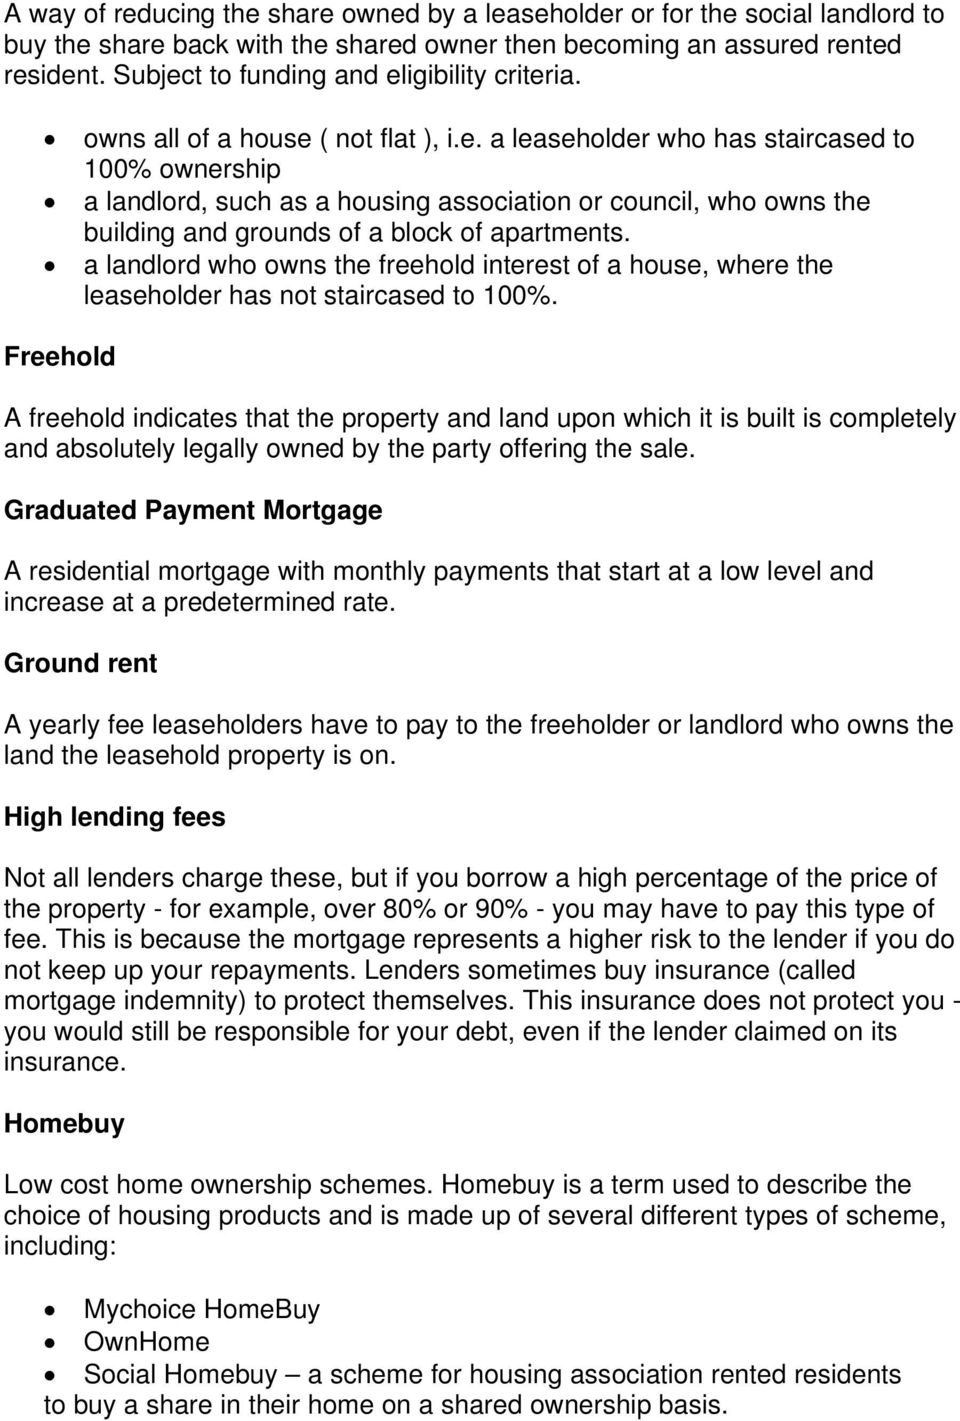 a landlord who owns the freehold interest of a house, where the leaseholder has not staircased to 100%.